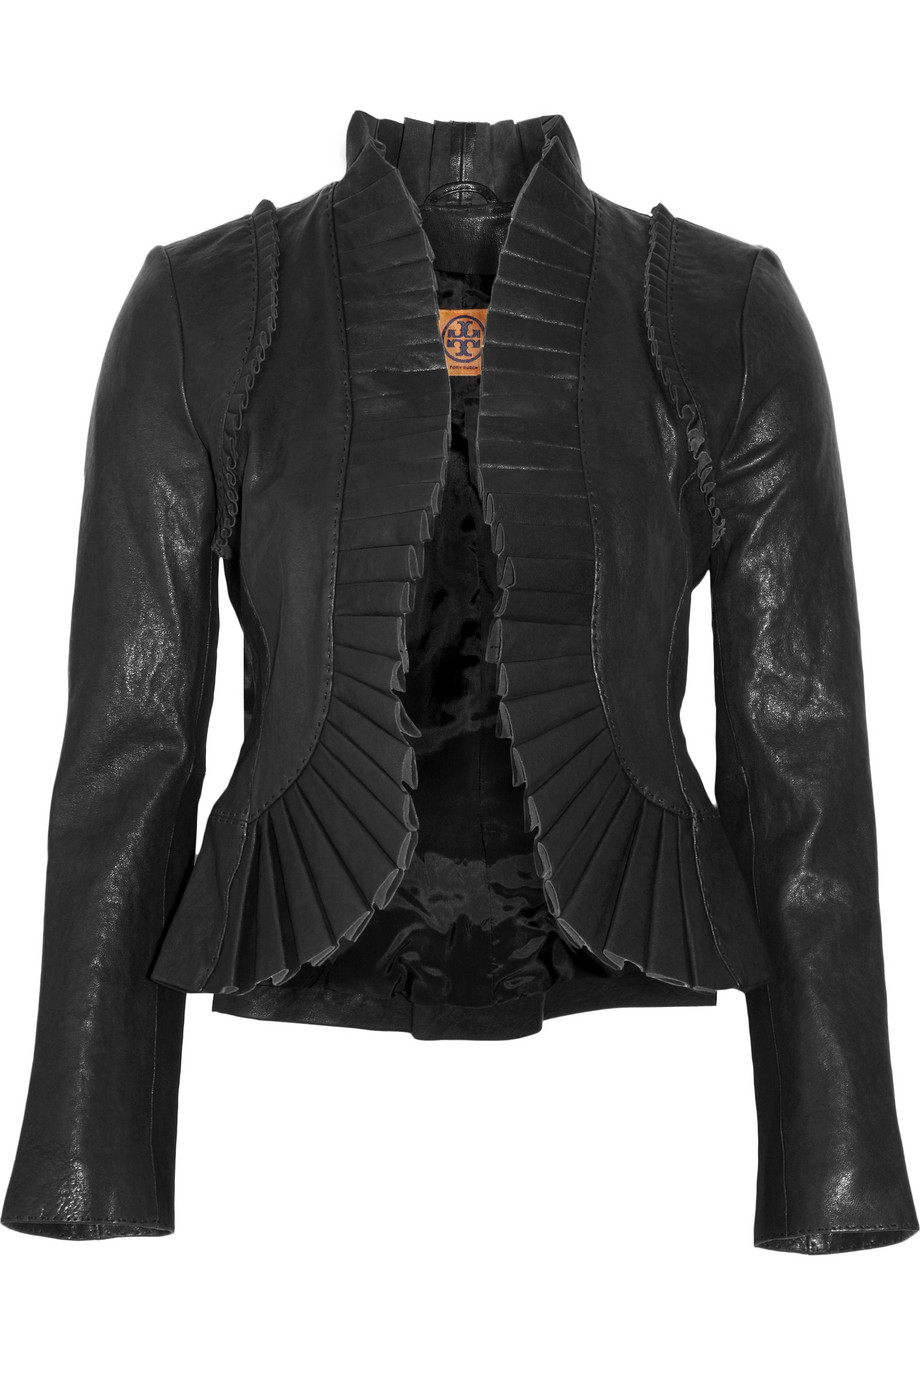 Tory Burch Andra Ruffled Leather Jacket in Black | Lyst